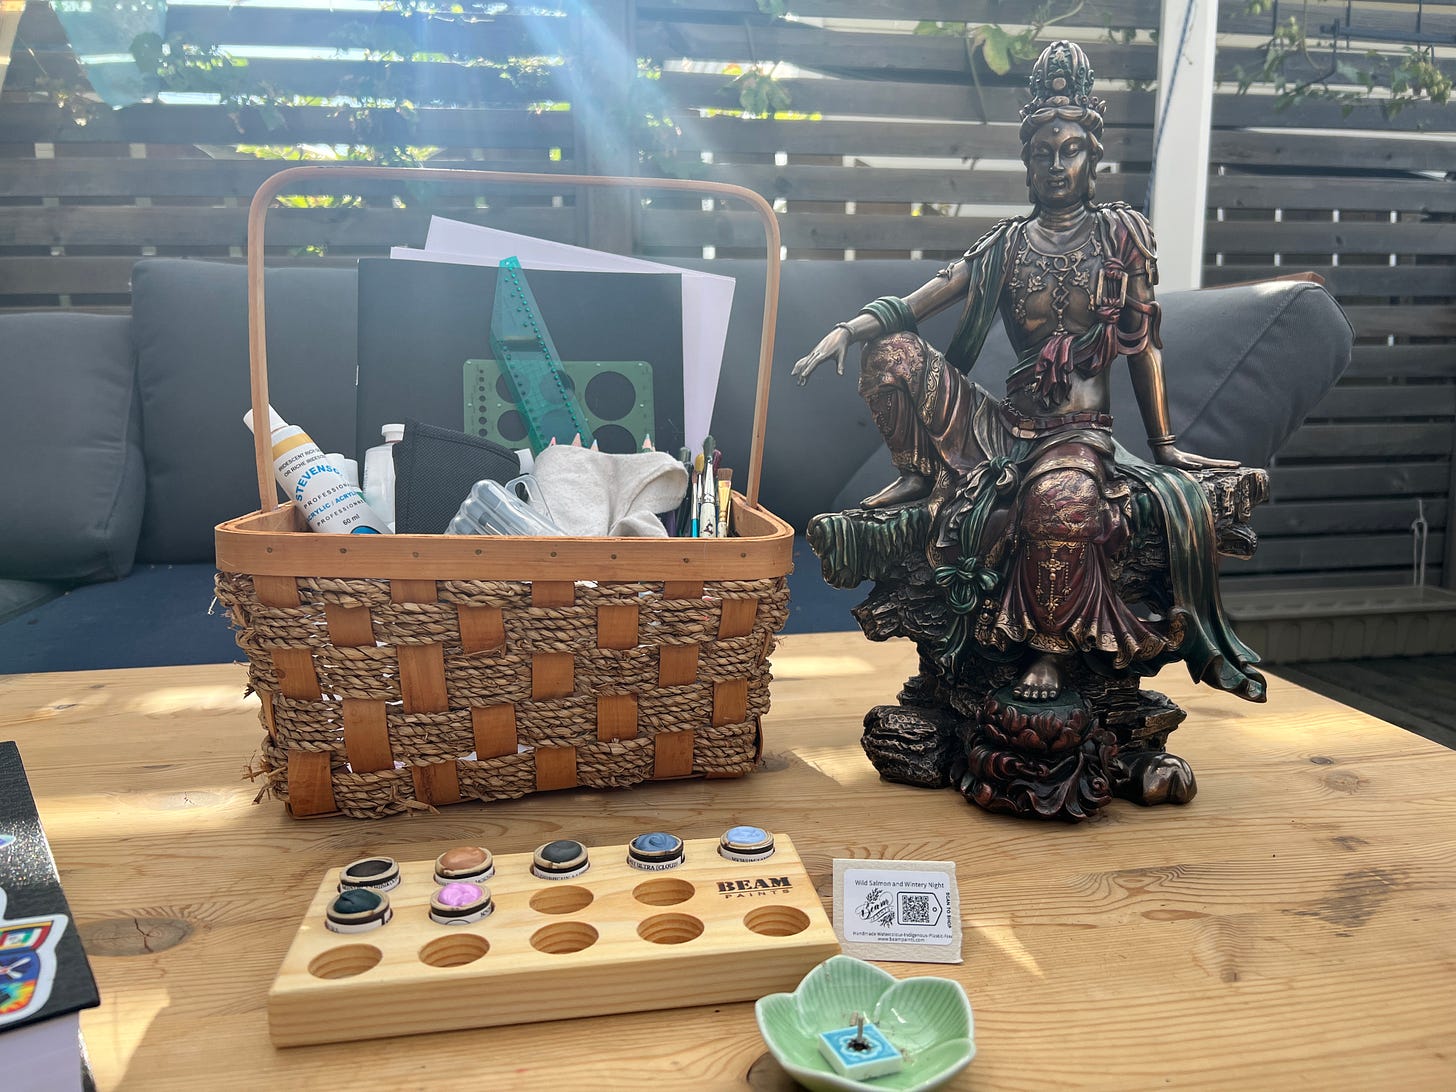 A statue of Kannon, the Japanese depiction of Avalokiteshvara, sitting on a wooden table next to the basket where I keep the supplies I am using for the piece. In the foreground are some watercolours, made by Beam paints, and an incense dish shaped like a flower. 